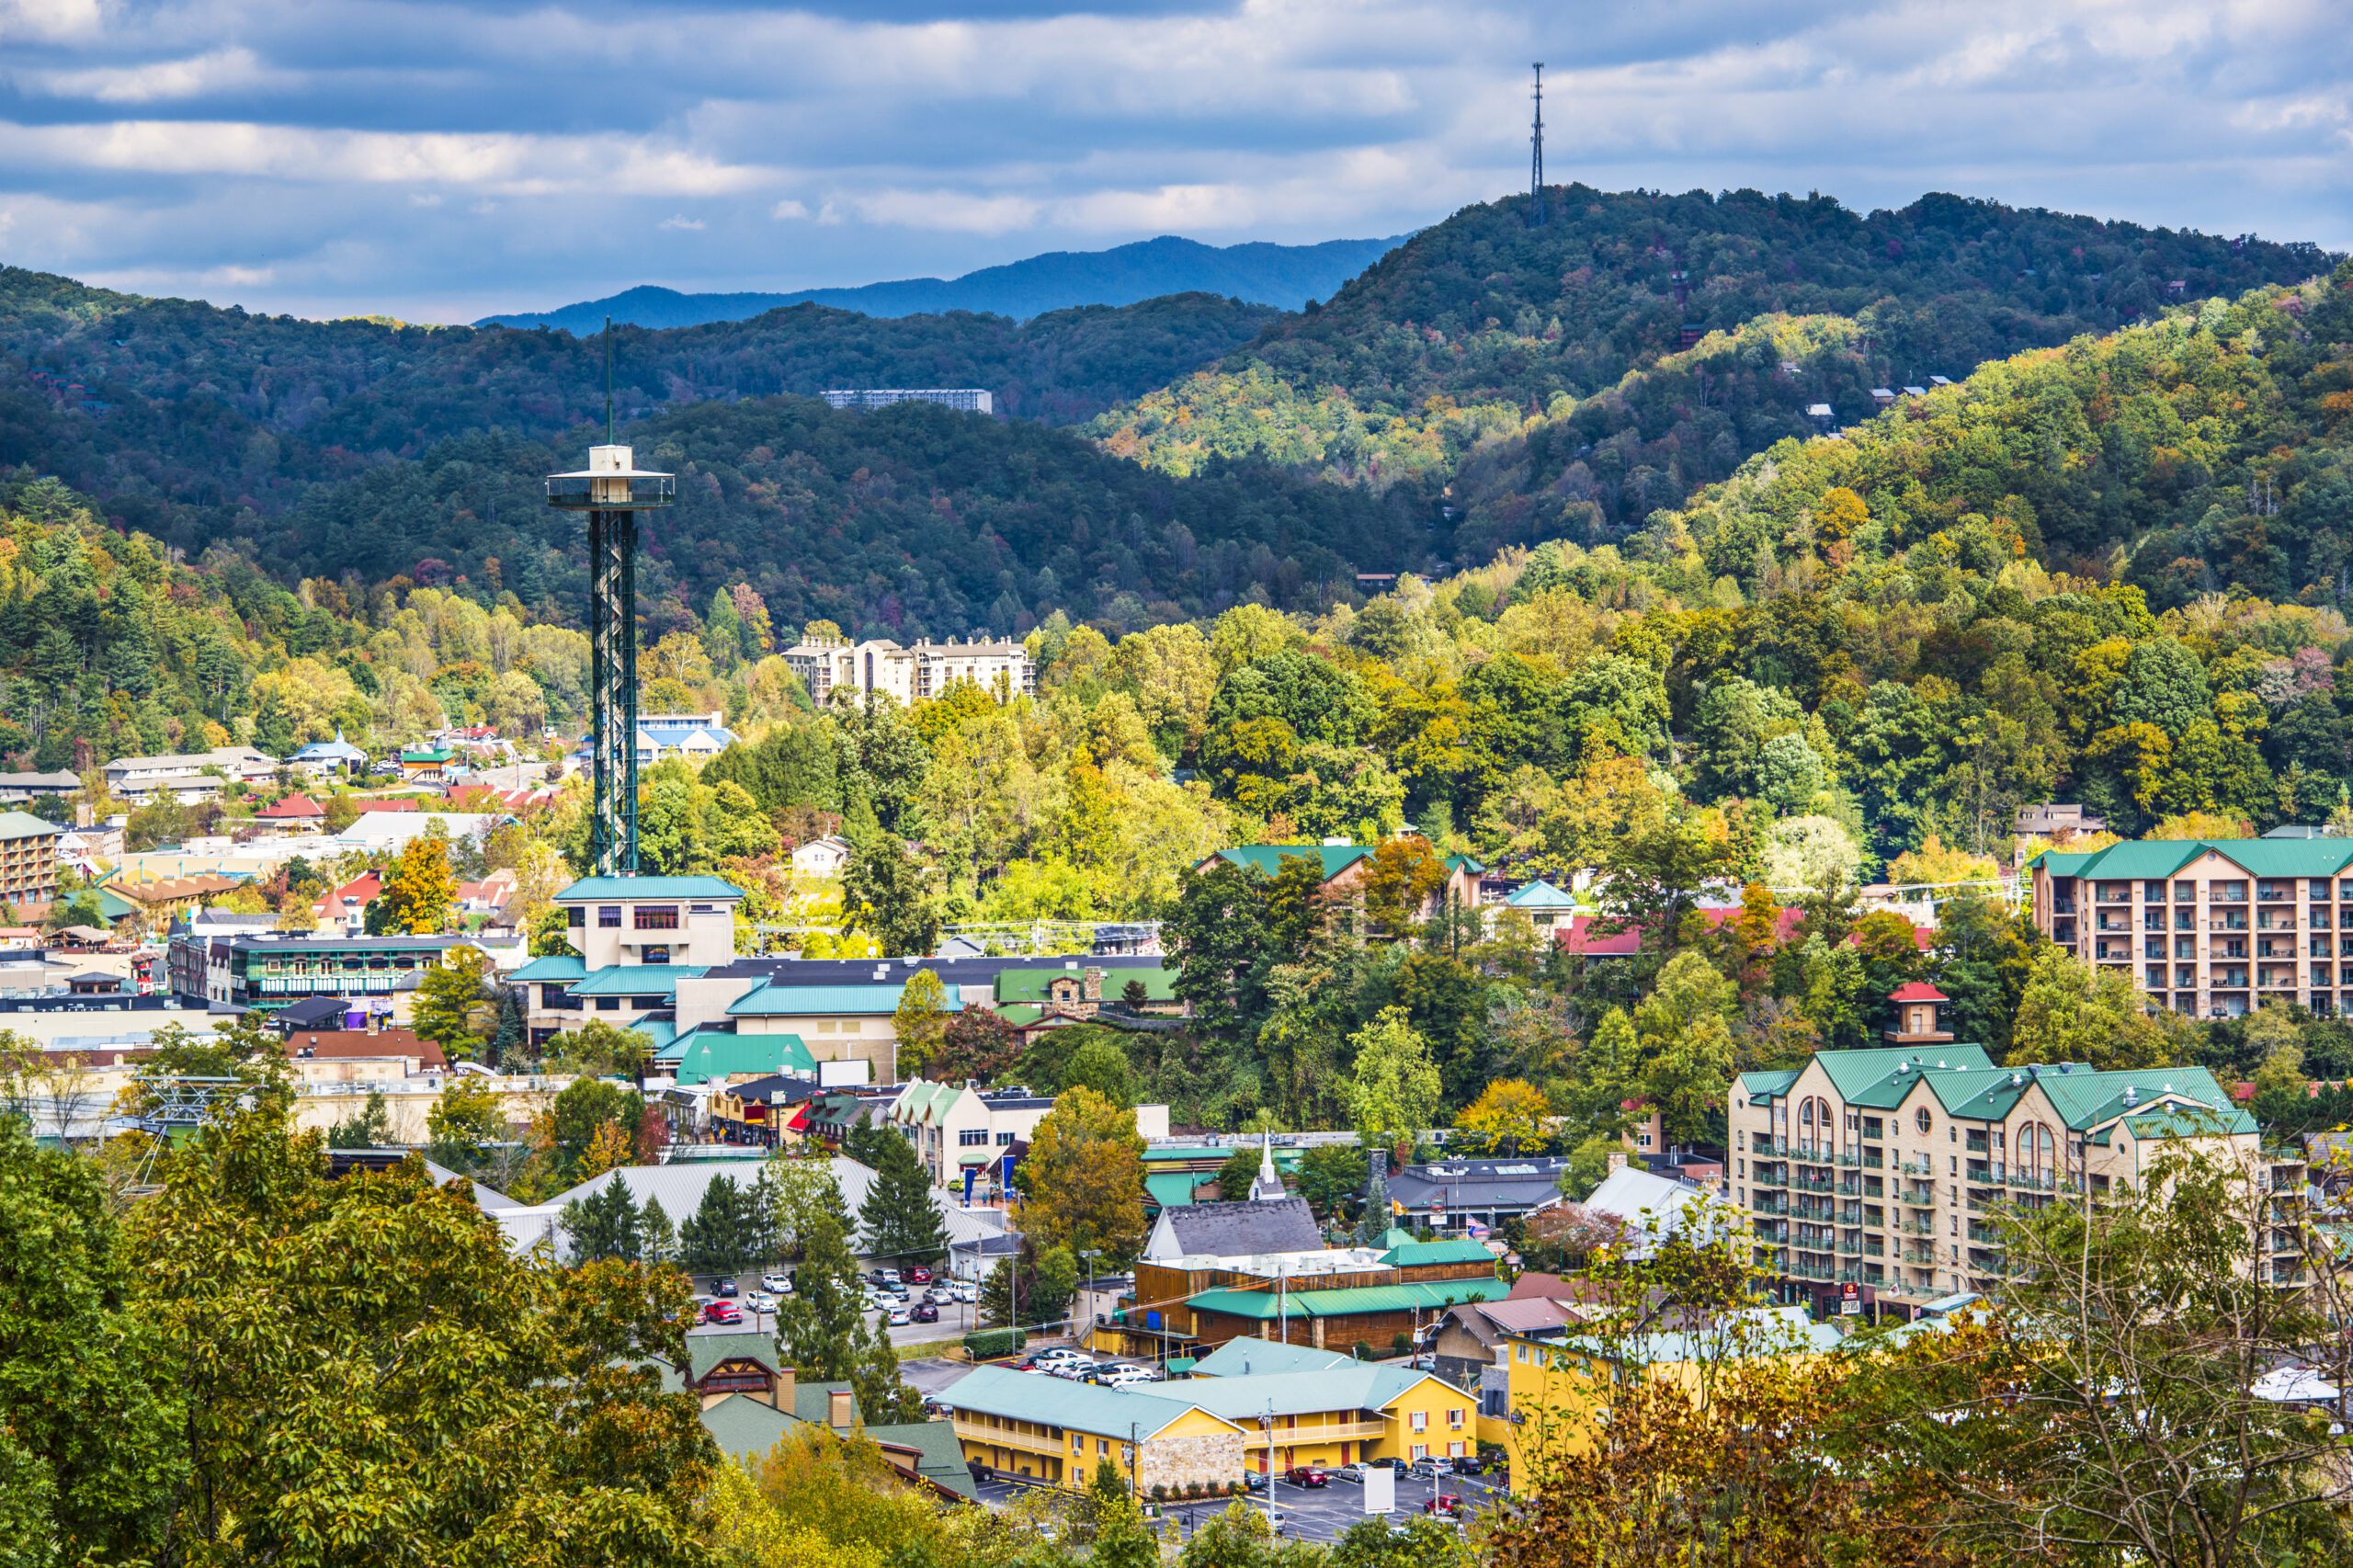 What to do on the Gatlinburg Parkway